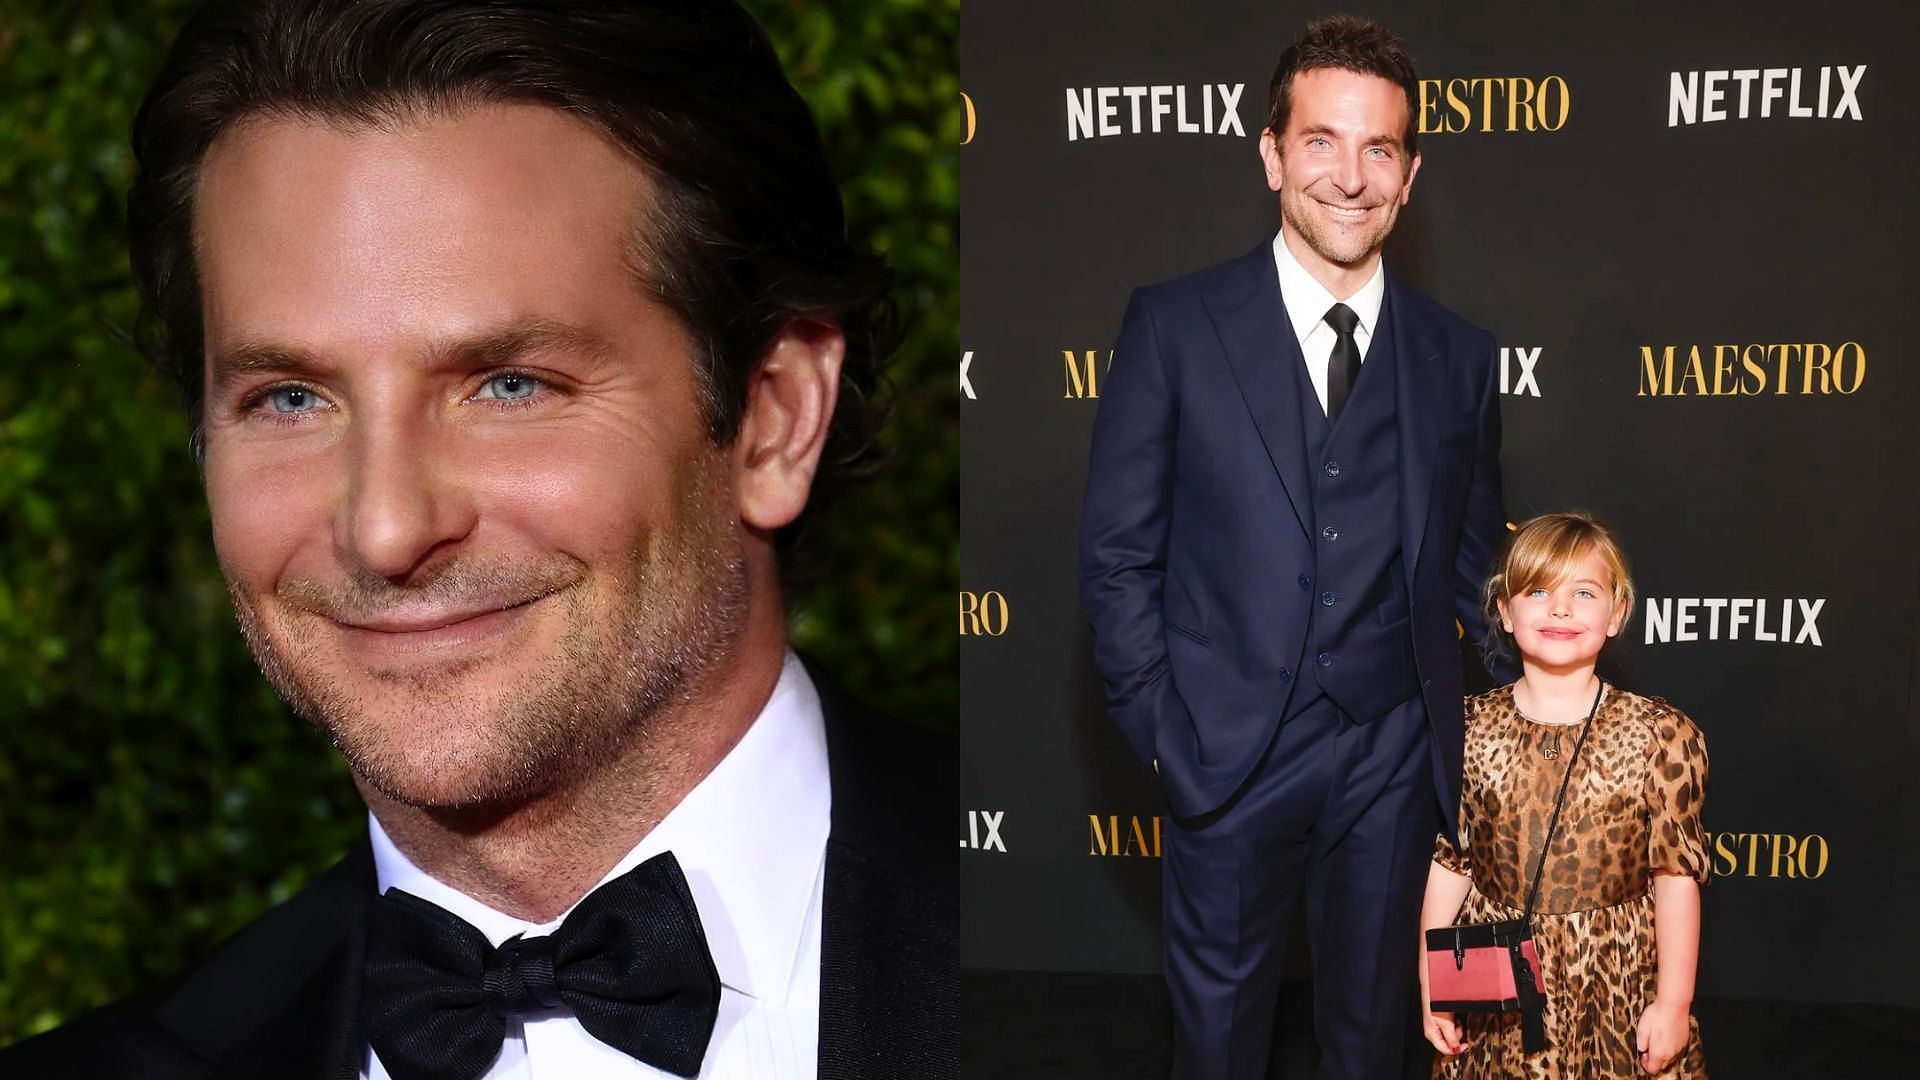 (L) Bradley Cooper, (R) with daughter Lea at the premiere for Maestro (Images via IMDb and Netflix)